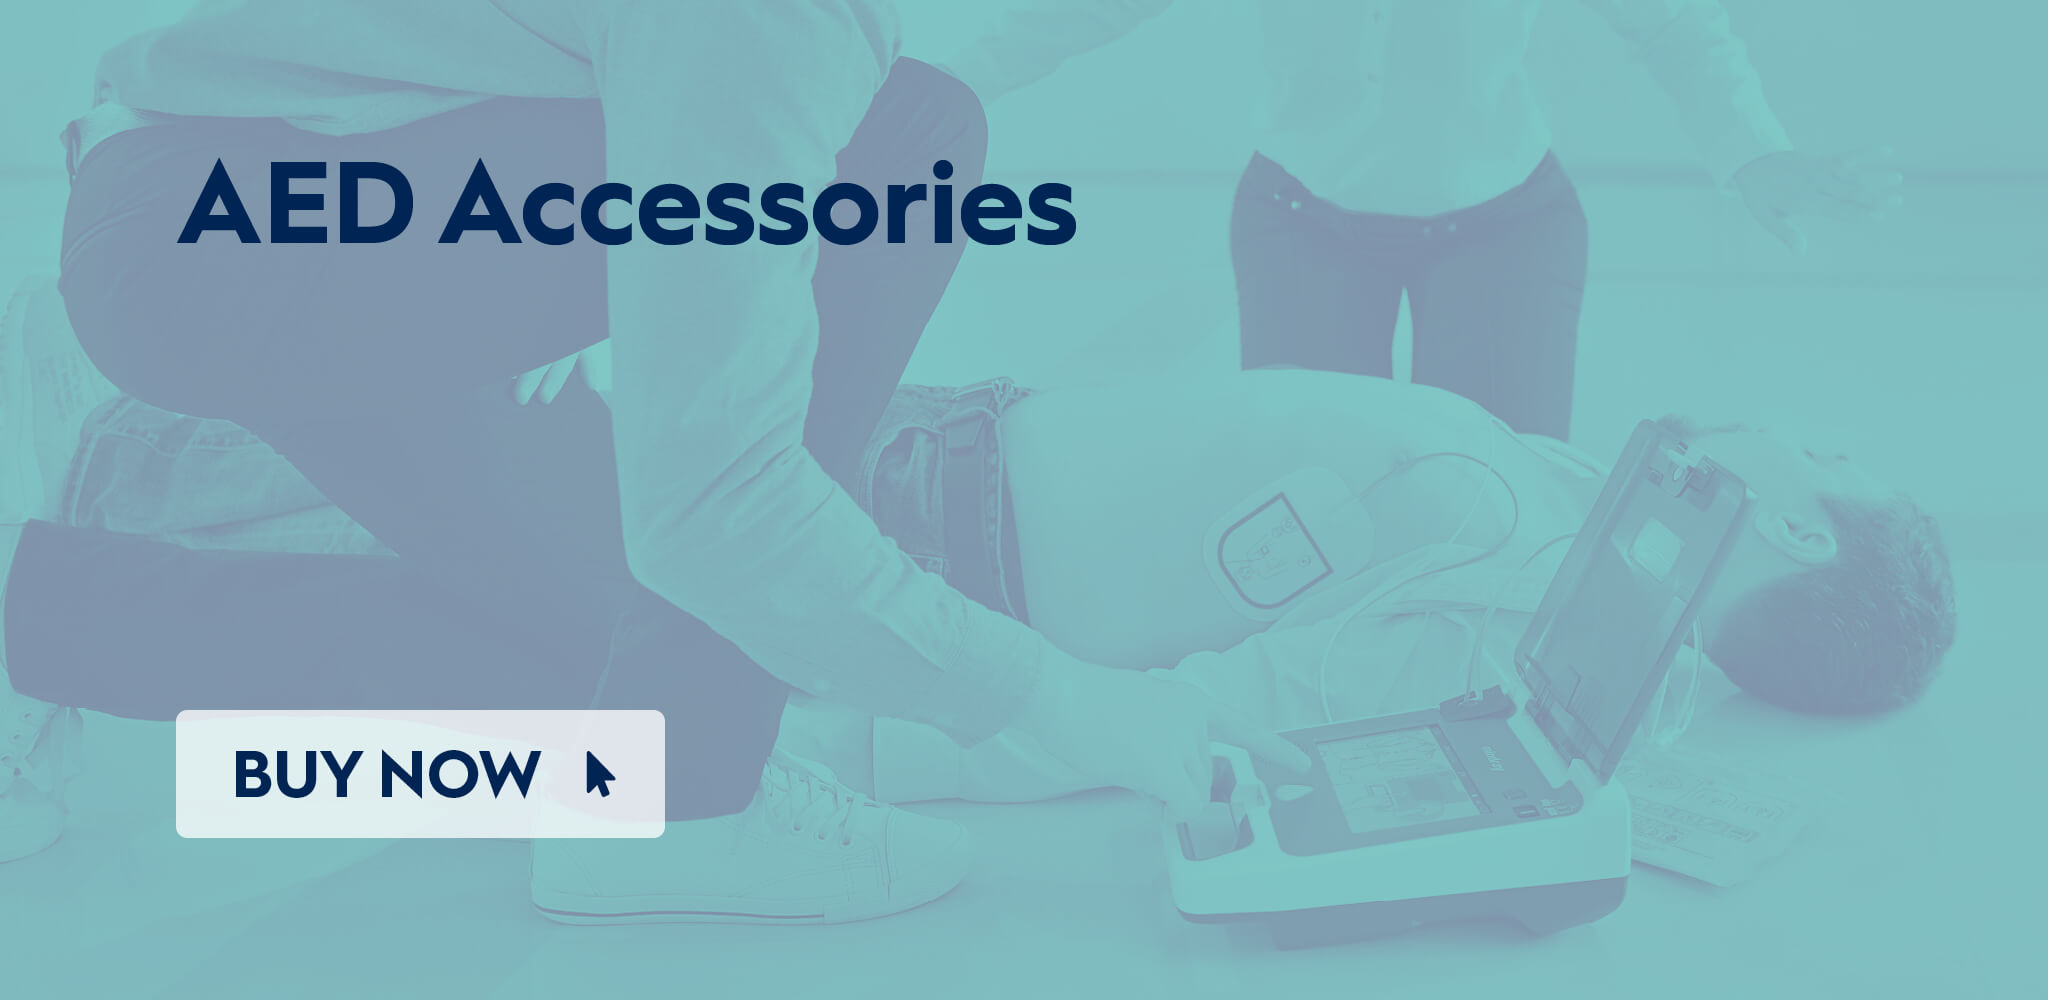 AEDs Accessories banner